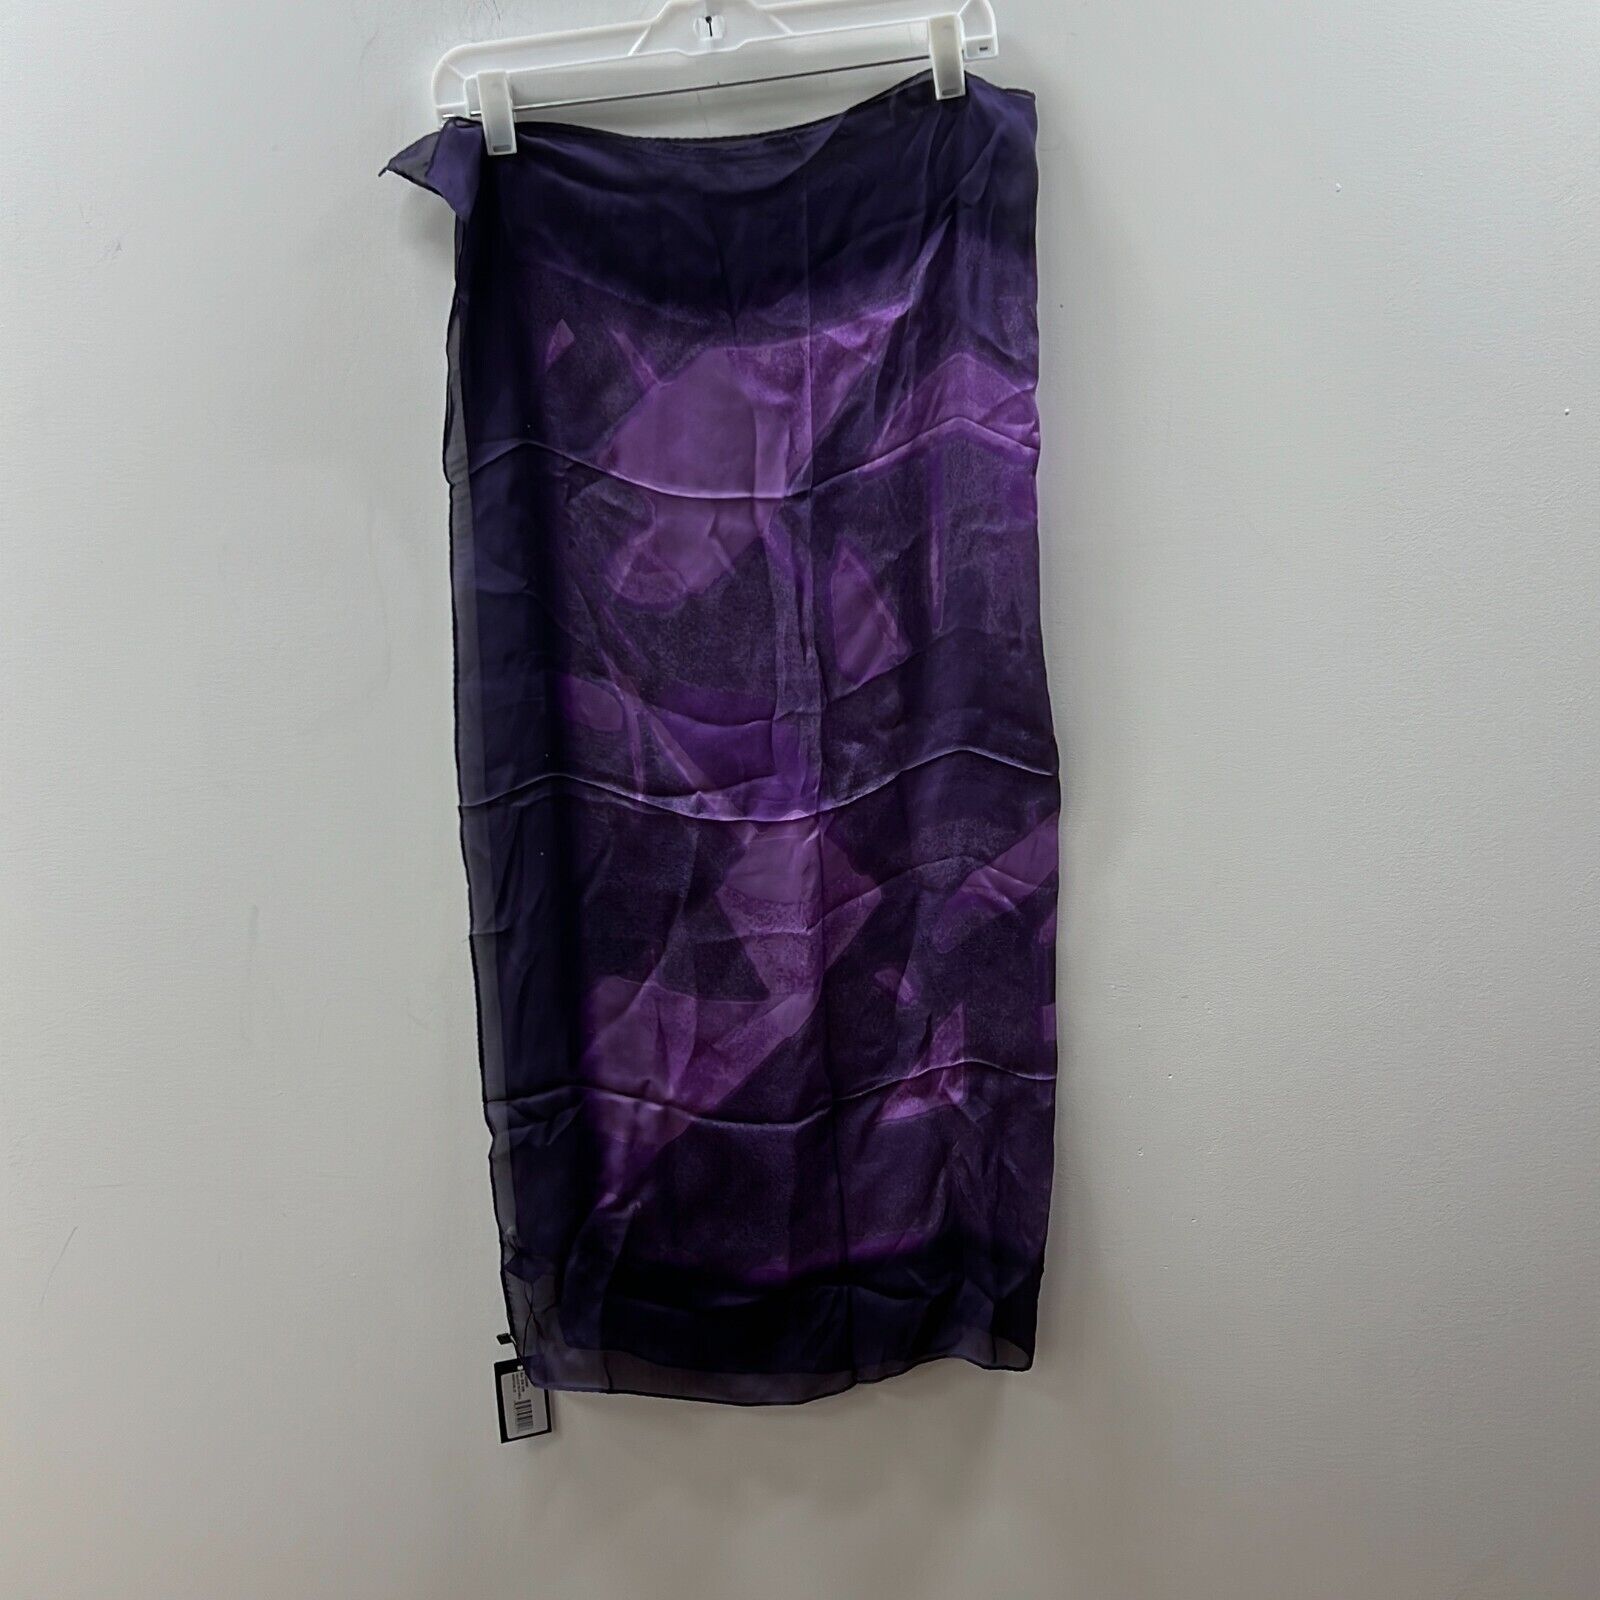 NWT Halston Heritage Women's Electric Purple Square Scarf One Size